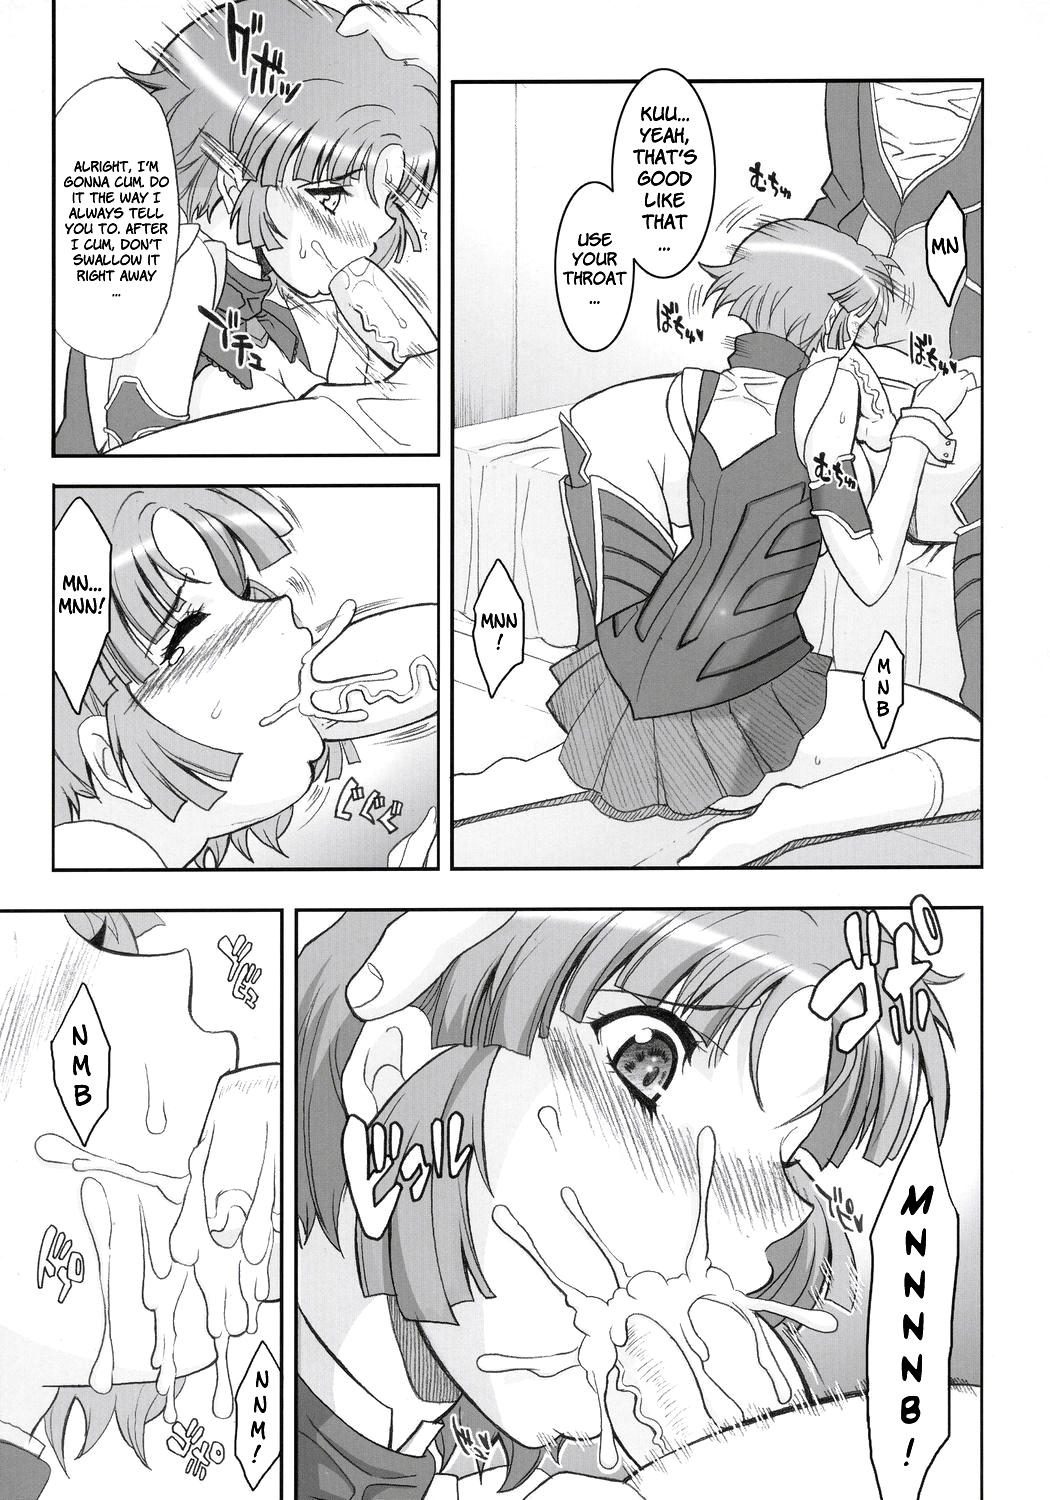 Pounded STEEL HEROINES Vol. 1 - Super robot wars Blow - Page 10